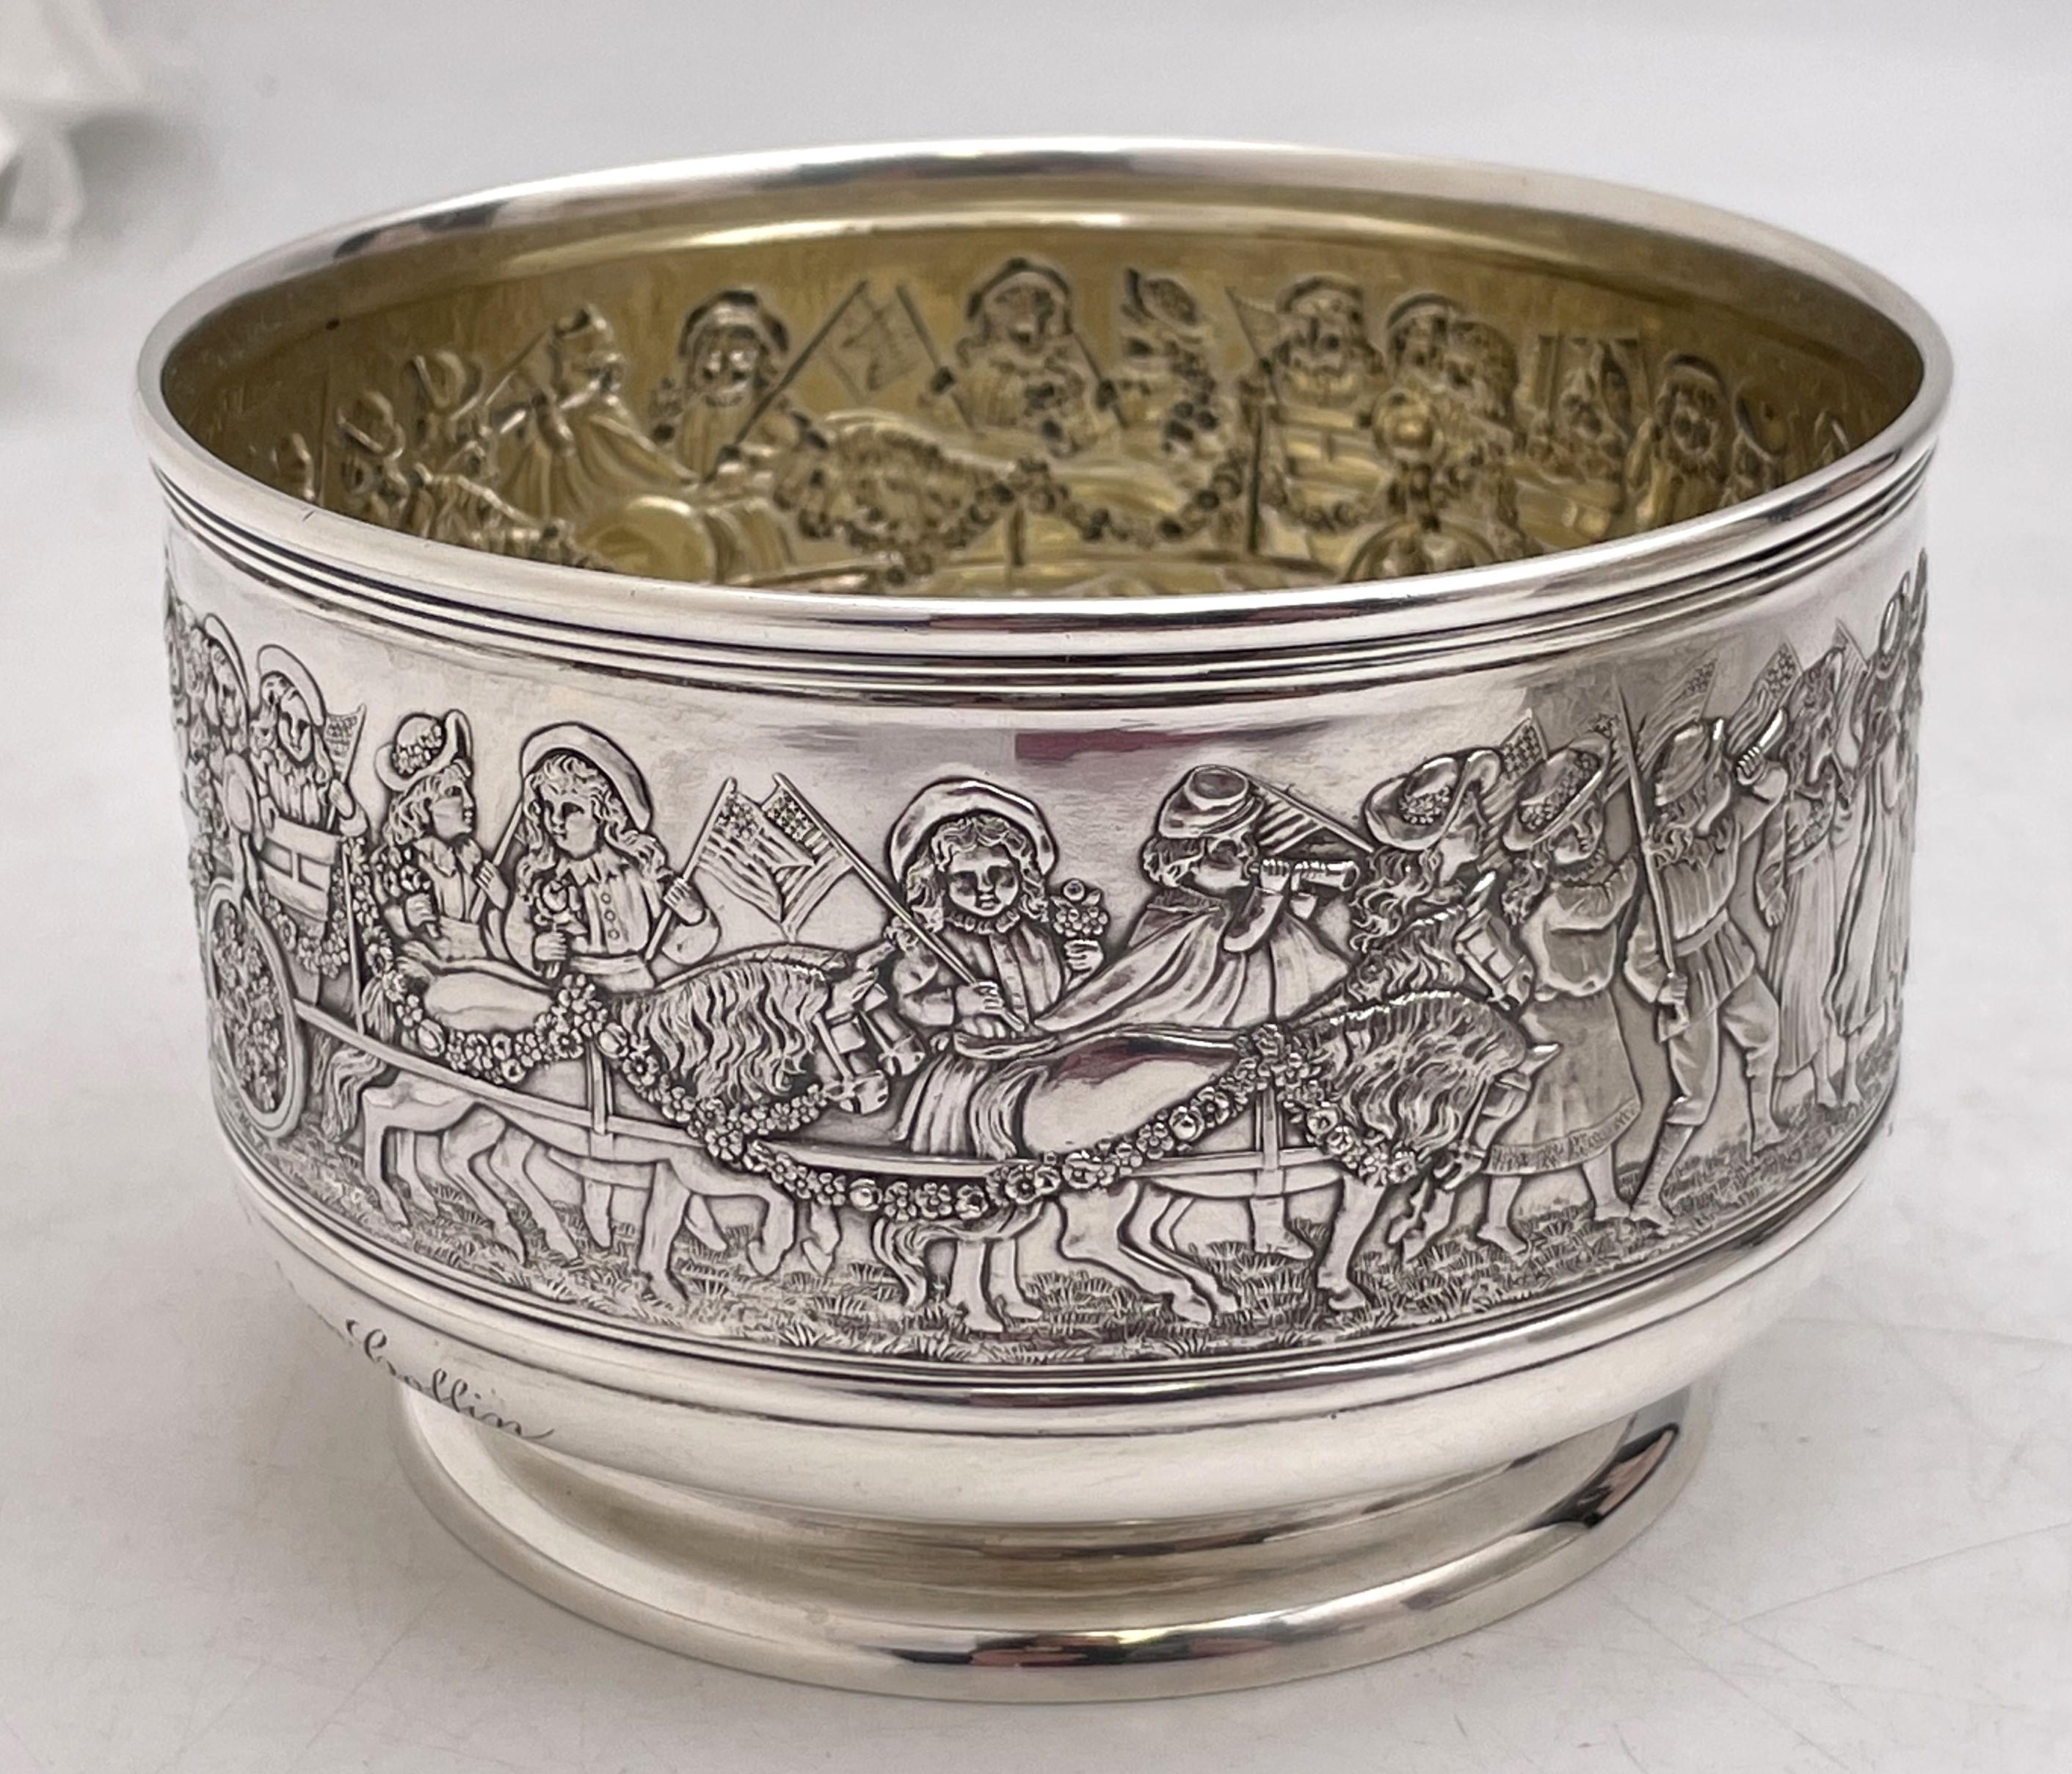 Tiffany & Co. sterling silver rare child bowl and porringer, depicting a patriotic children's marching band, beautifully embossed. The bowl dates from 1892 to 1902, measures 5 '' in diameter by 3 1/8'' in height, and contains one and a half pints.